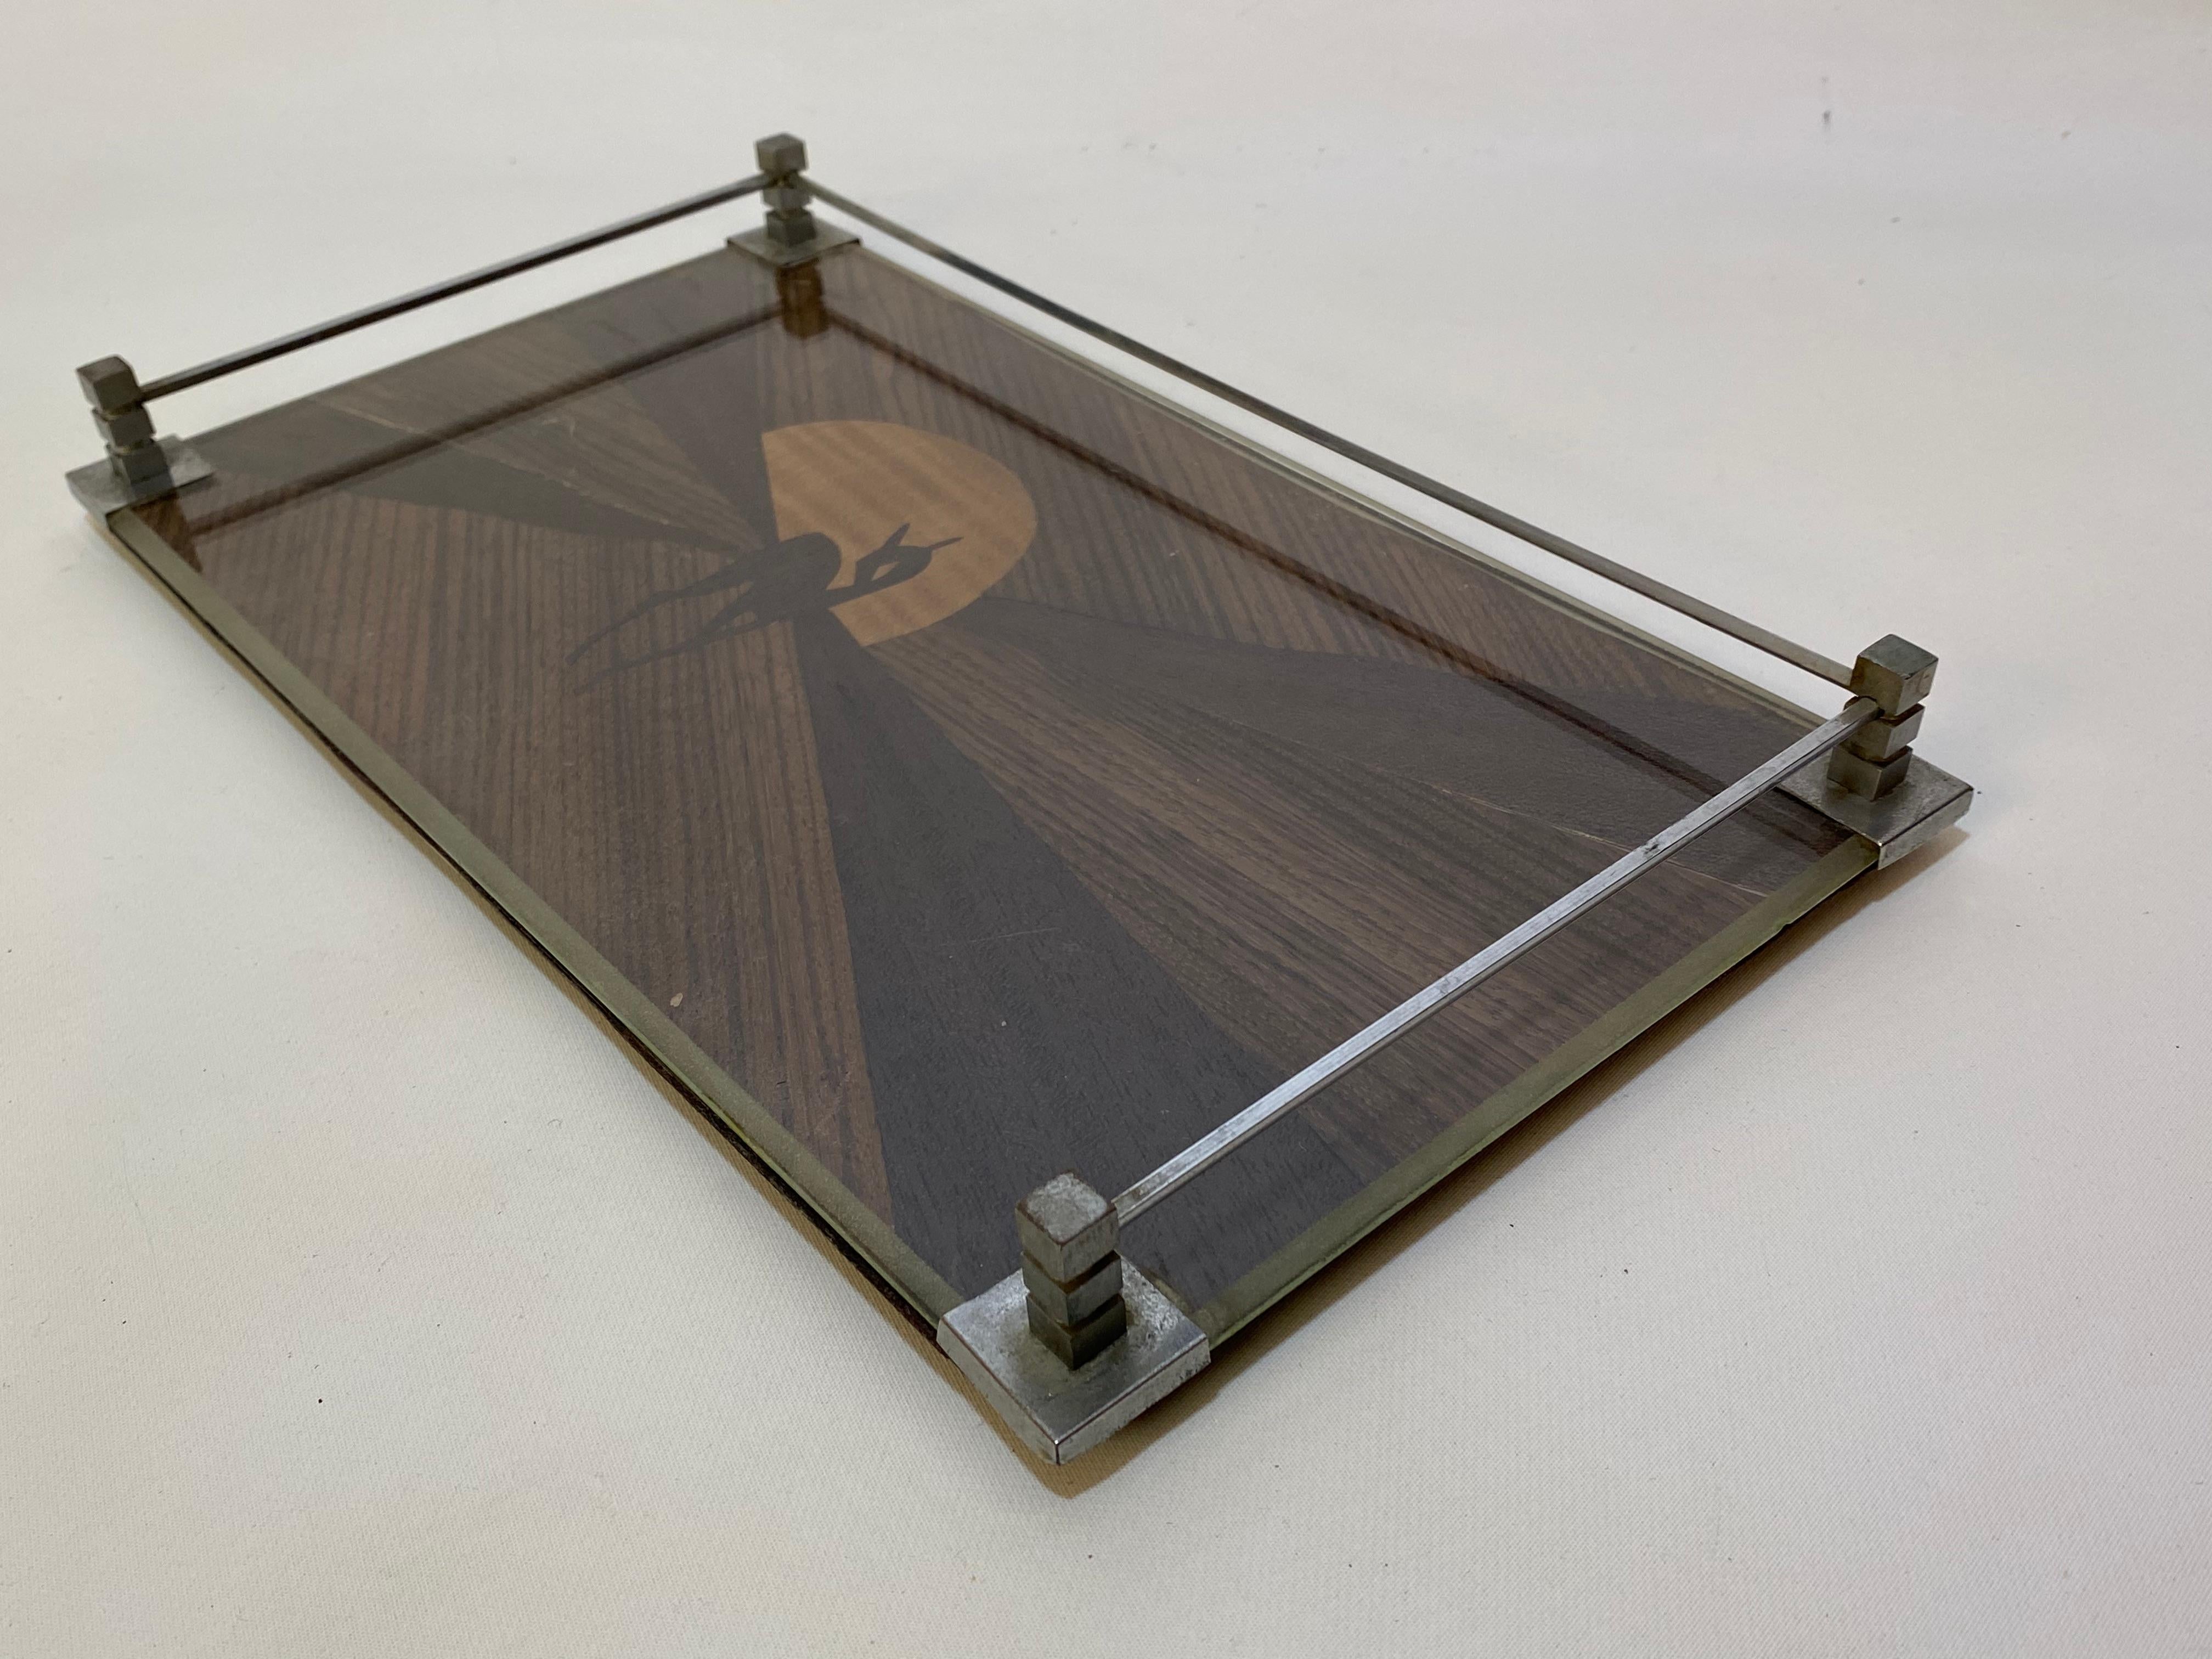 American Exotic Hardwood Inlaid Glass and Nickel Art Deco Tray with Faun